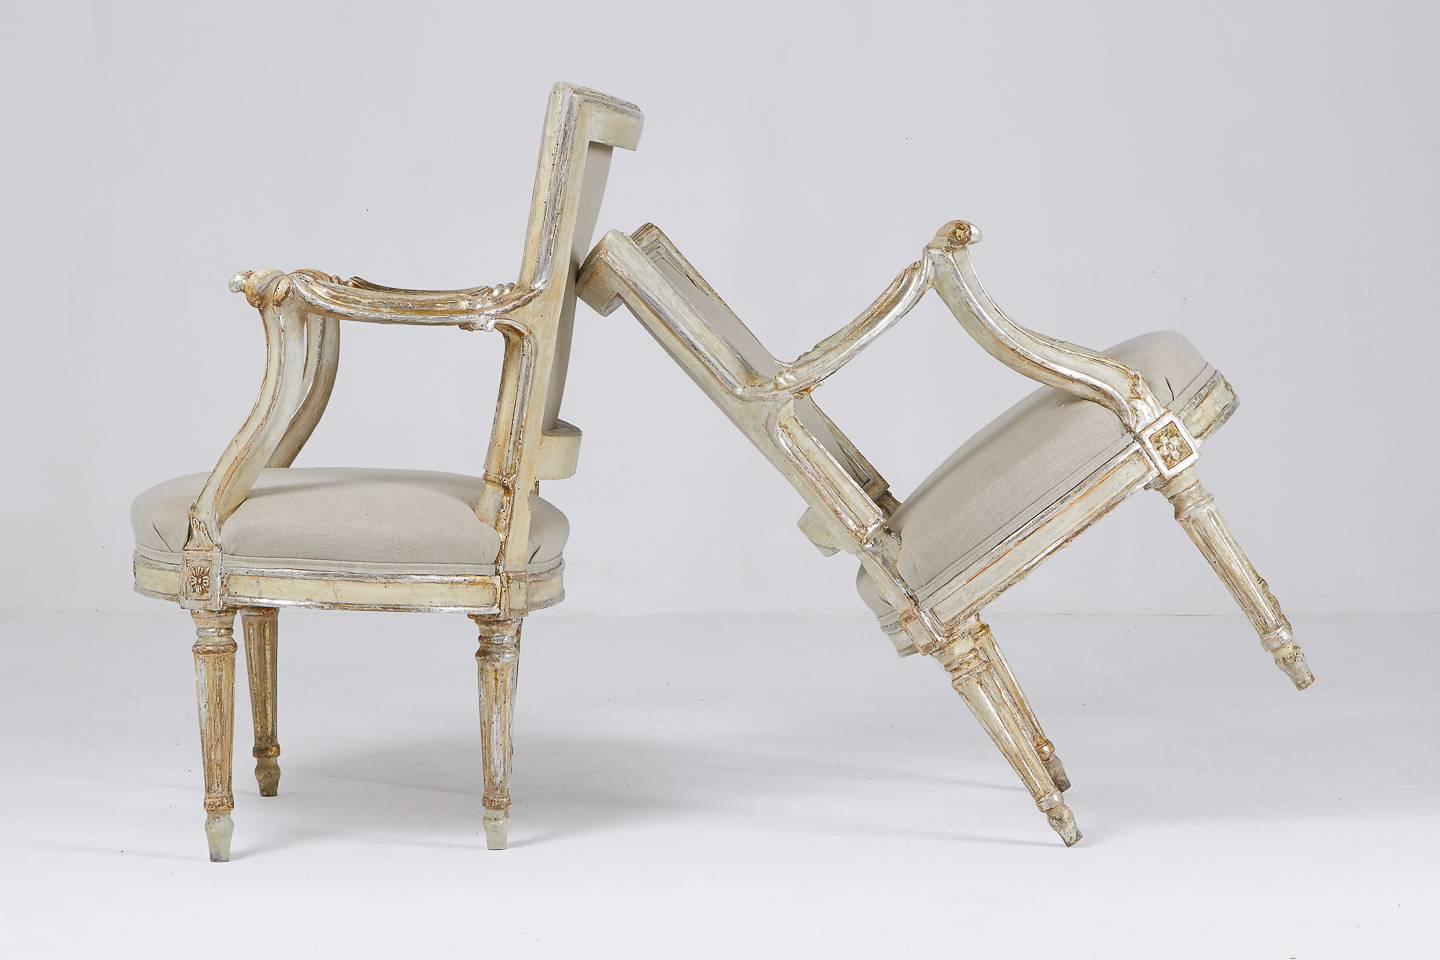 Unusual design, petite pair of 18th century silver gilt and painted Italian armchairs.

Measure: Seat height 40cm.